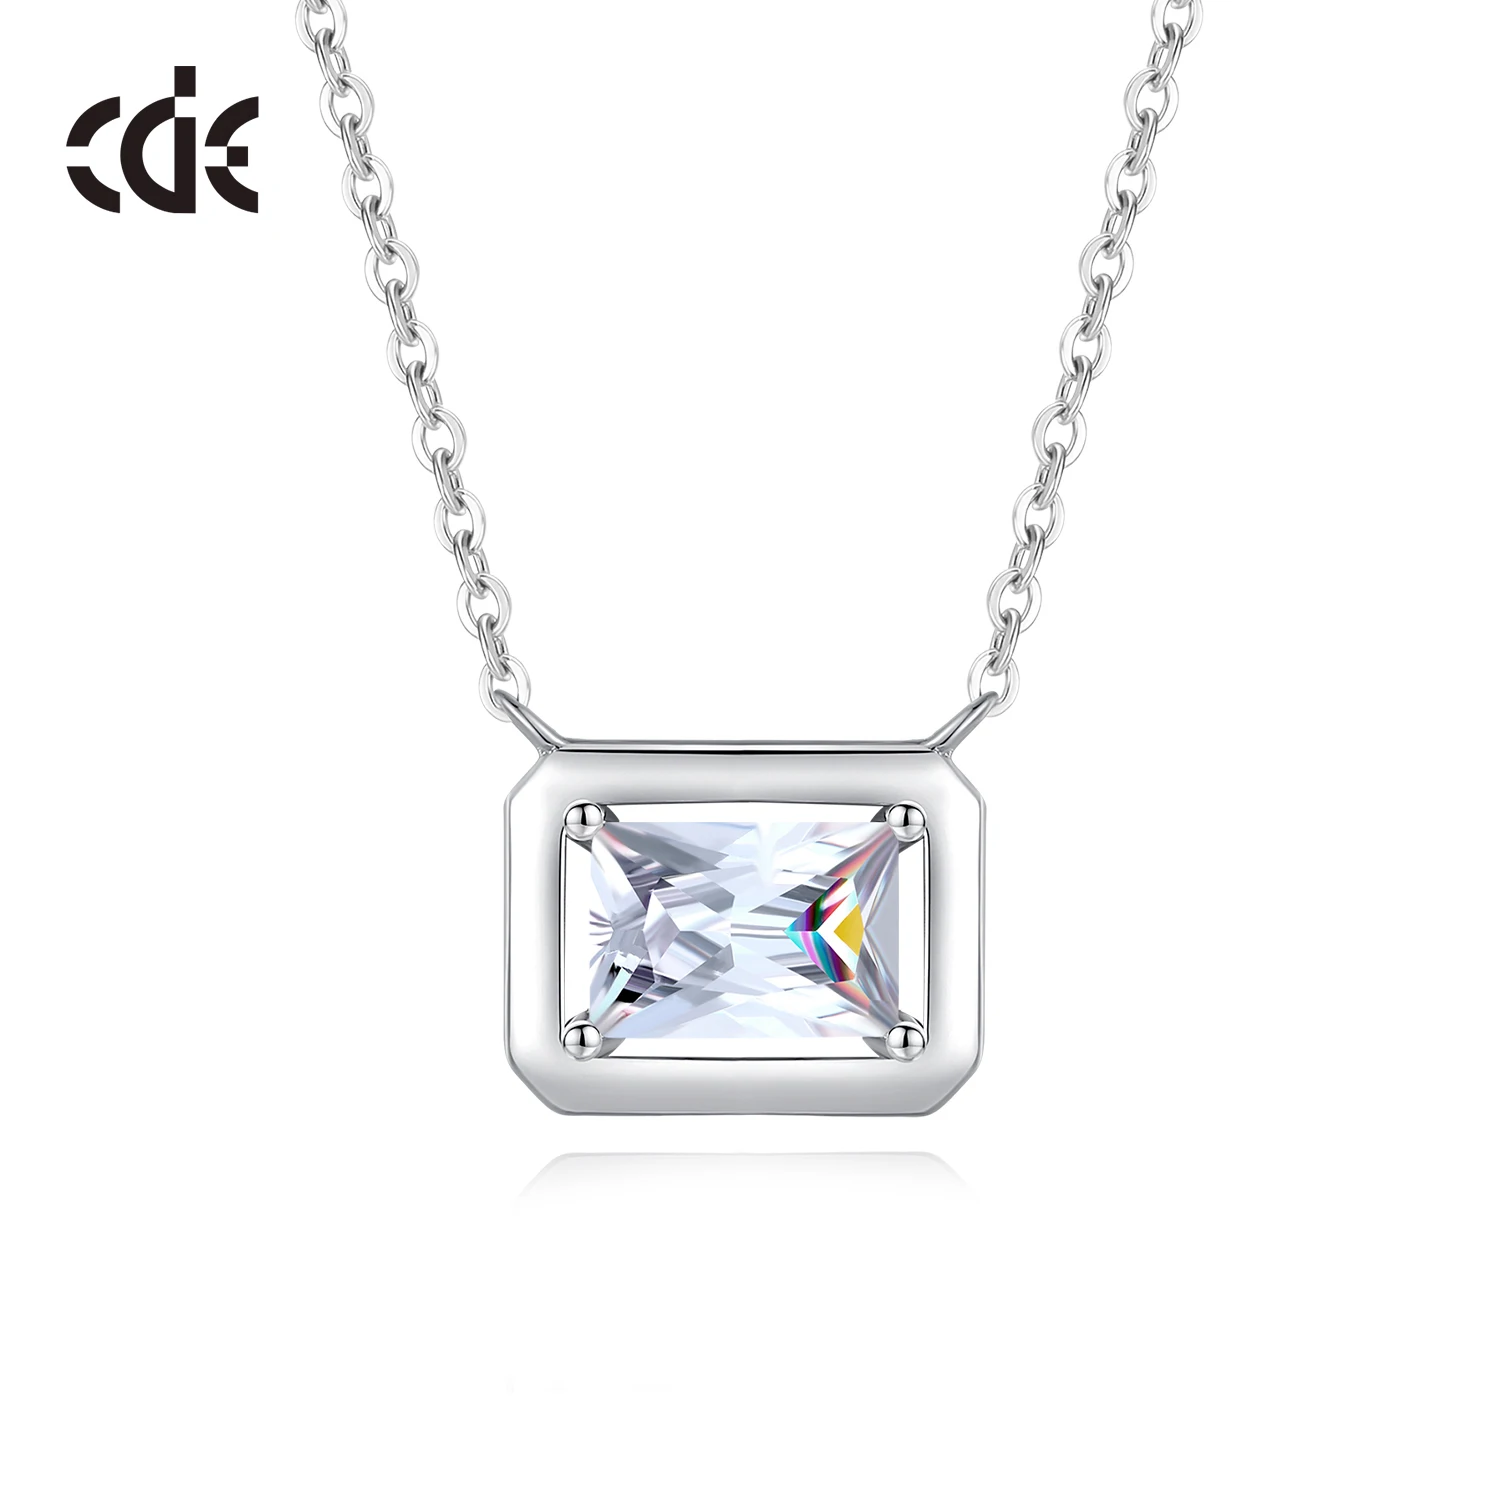 CDE YN1181 Fine 925 Sterling Silver Jewelry 5A Cubic Zirconia Charm Necklace Wholesale Rhodium Plated Pendant Necklace